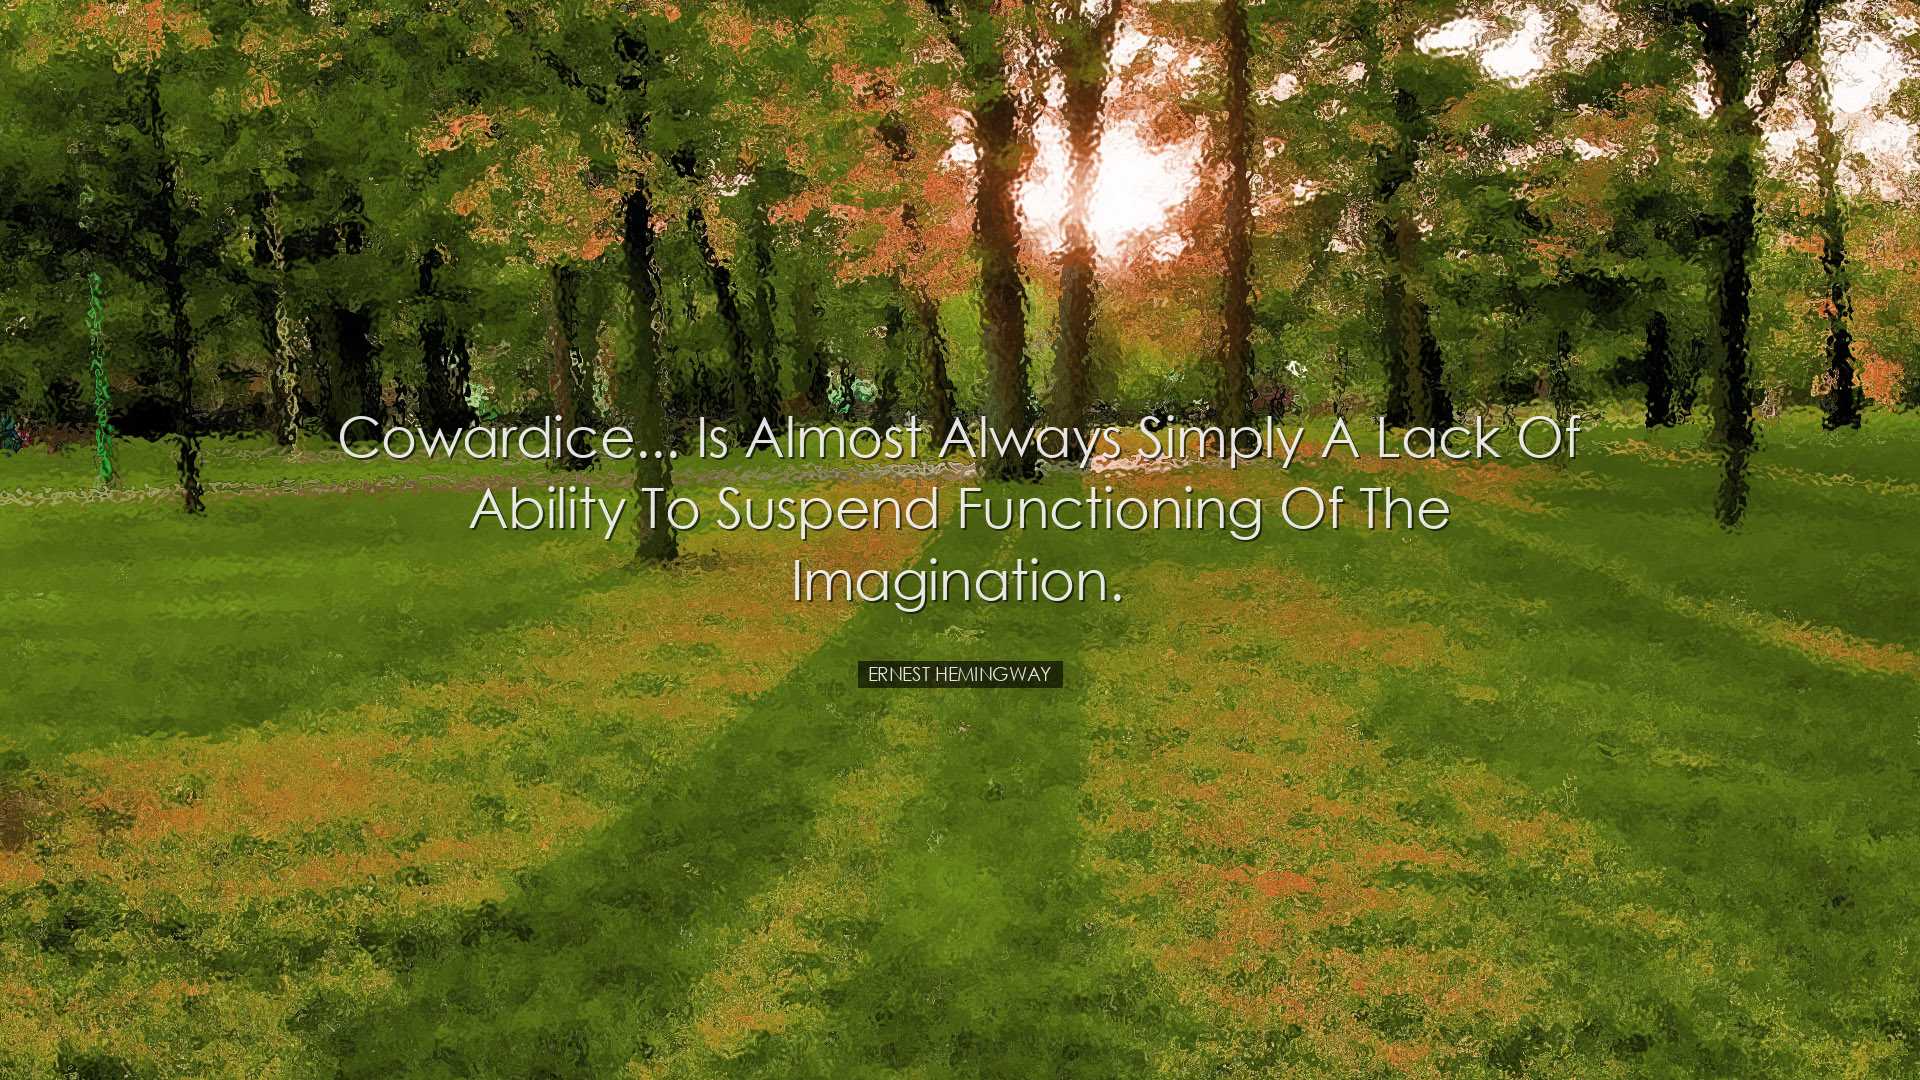 Cowardice... is almost always simply a lack of ability to suspend